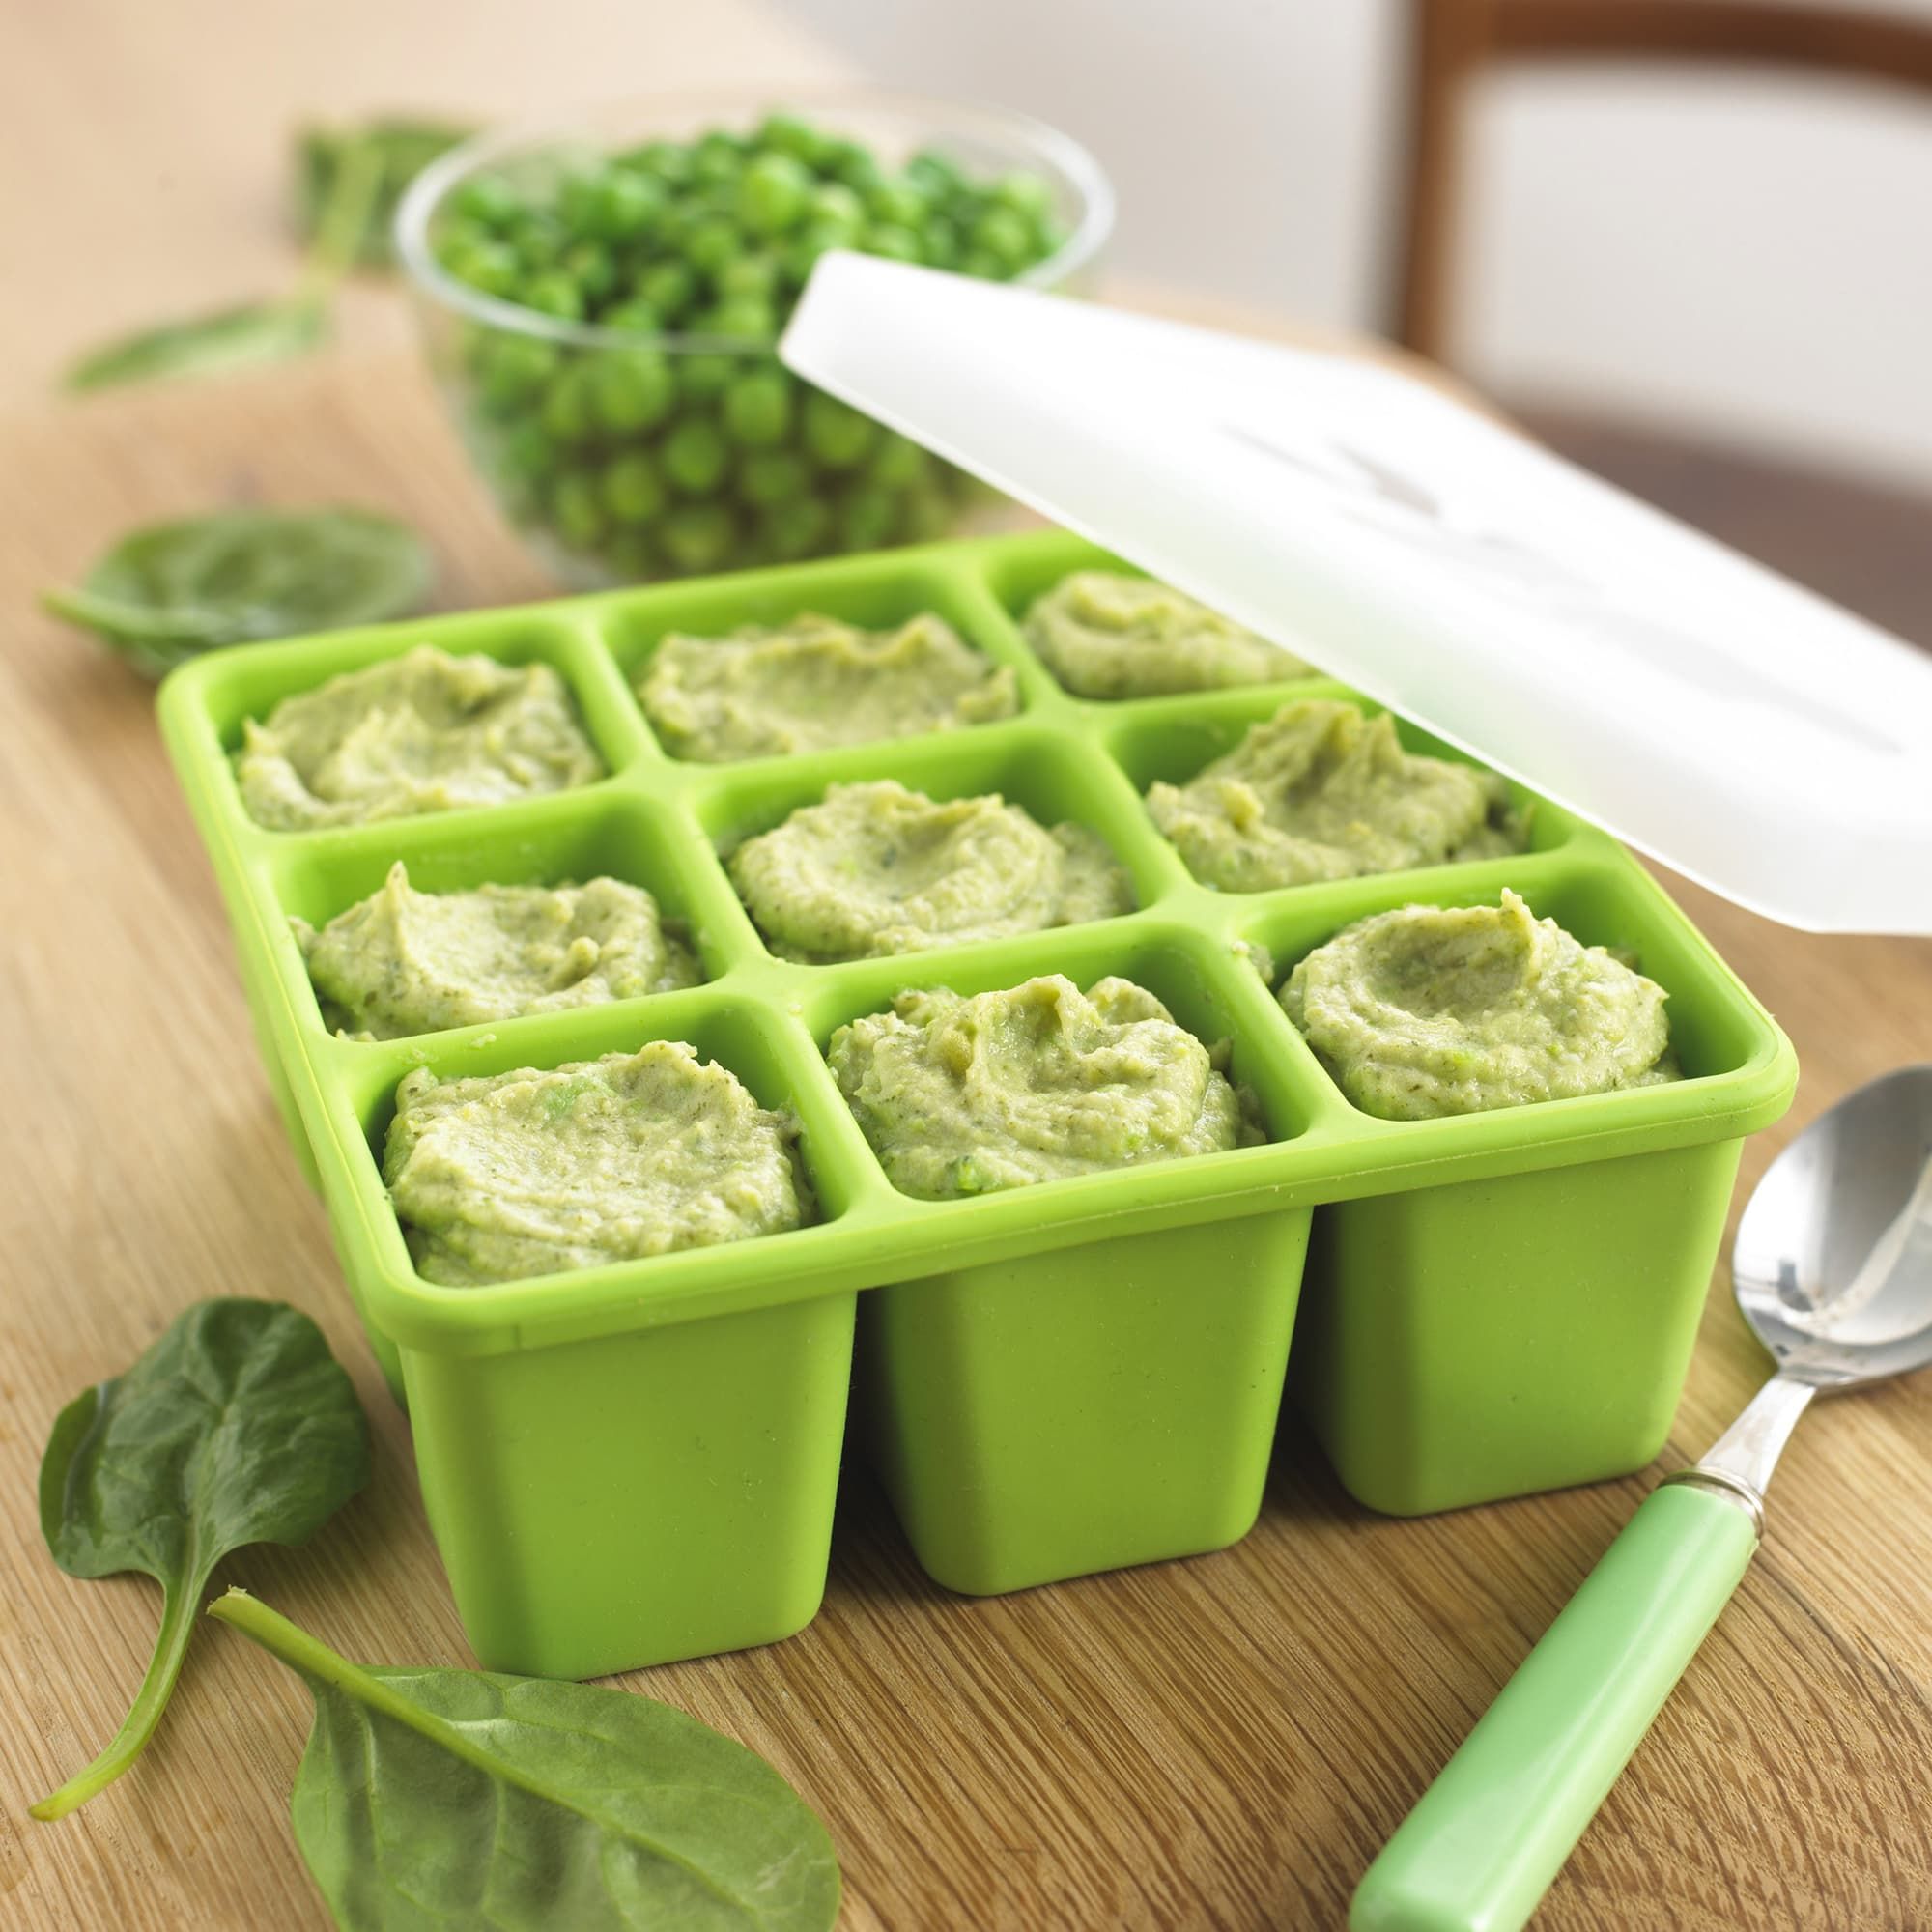 NUK Silicone Baby Food Freezer Tray, Green - image 4 of 6